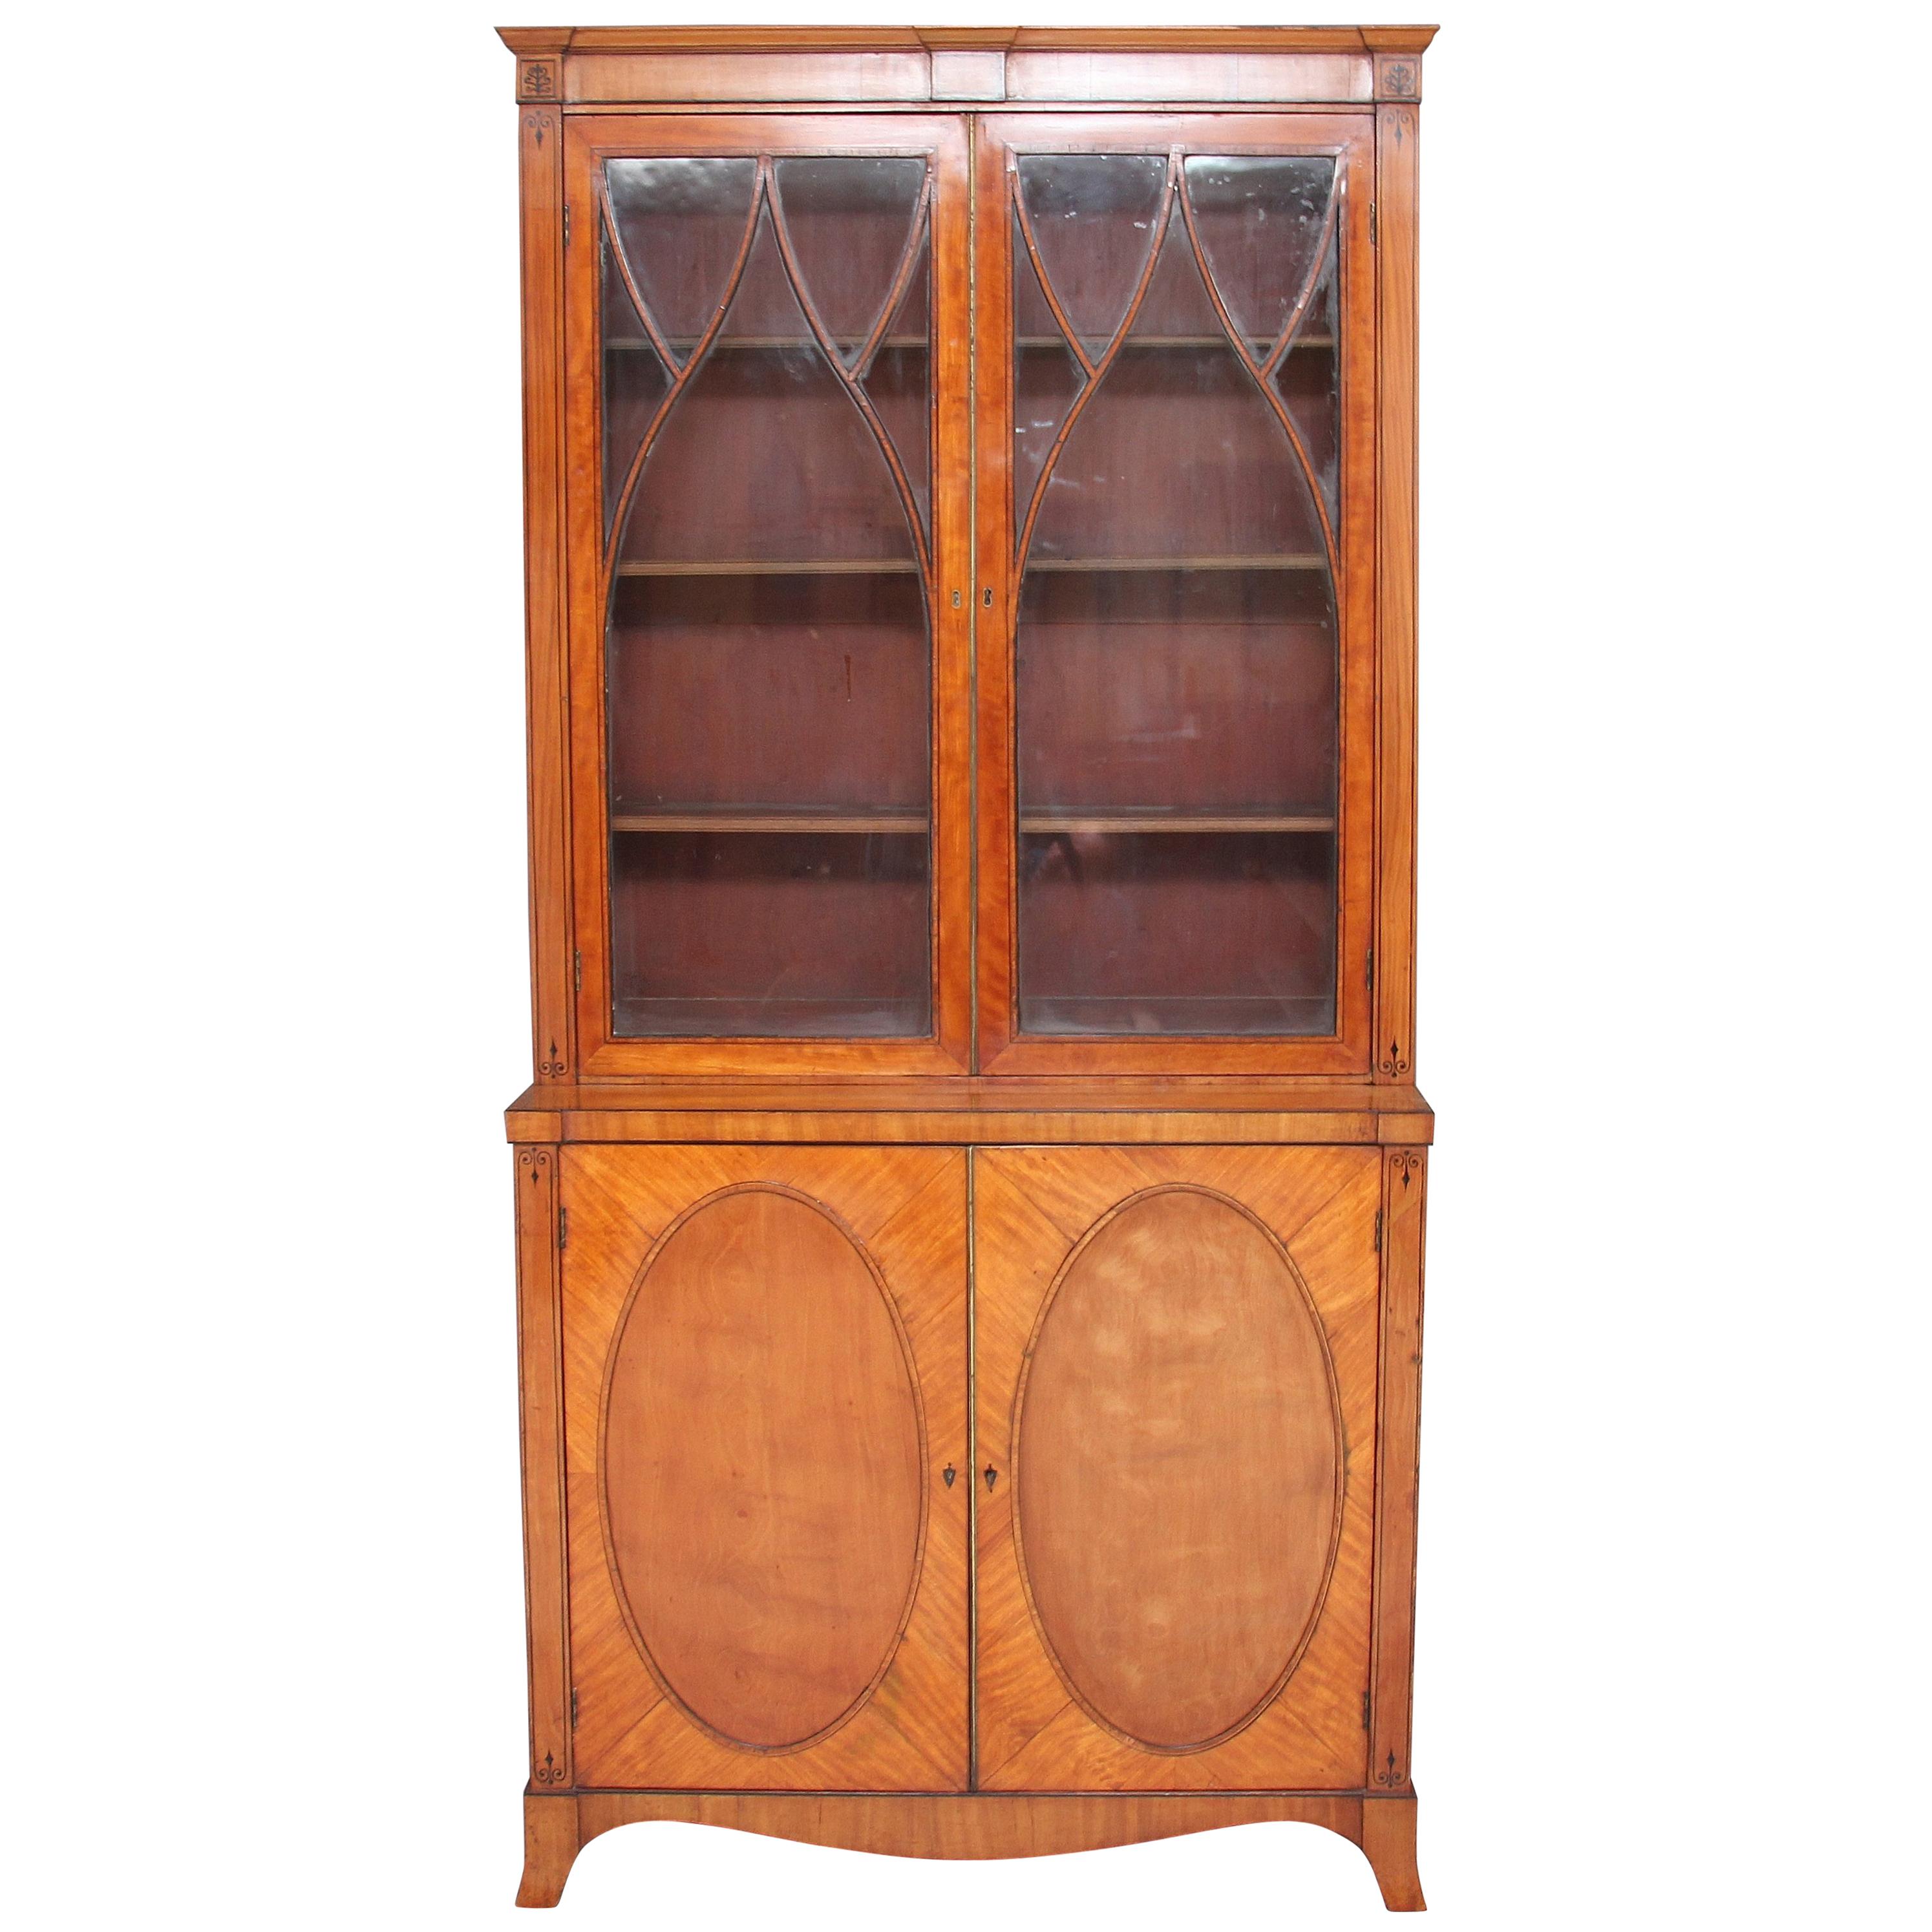 Early 19th Century Satinwood Bookcase